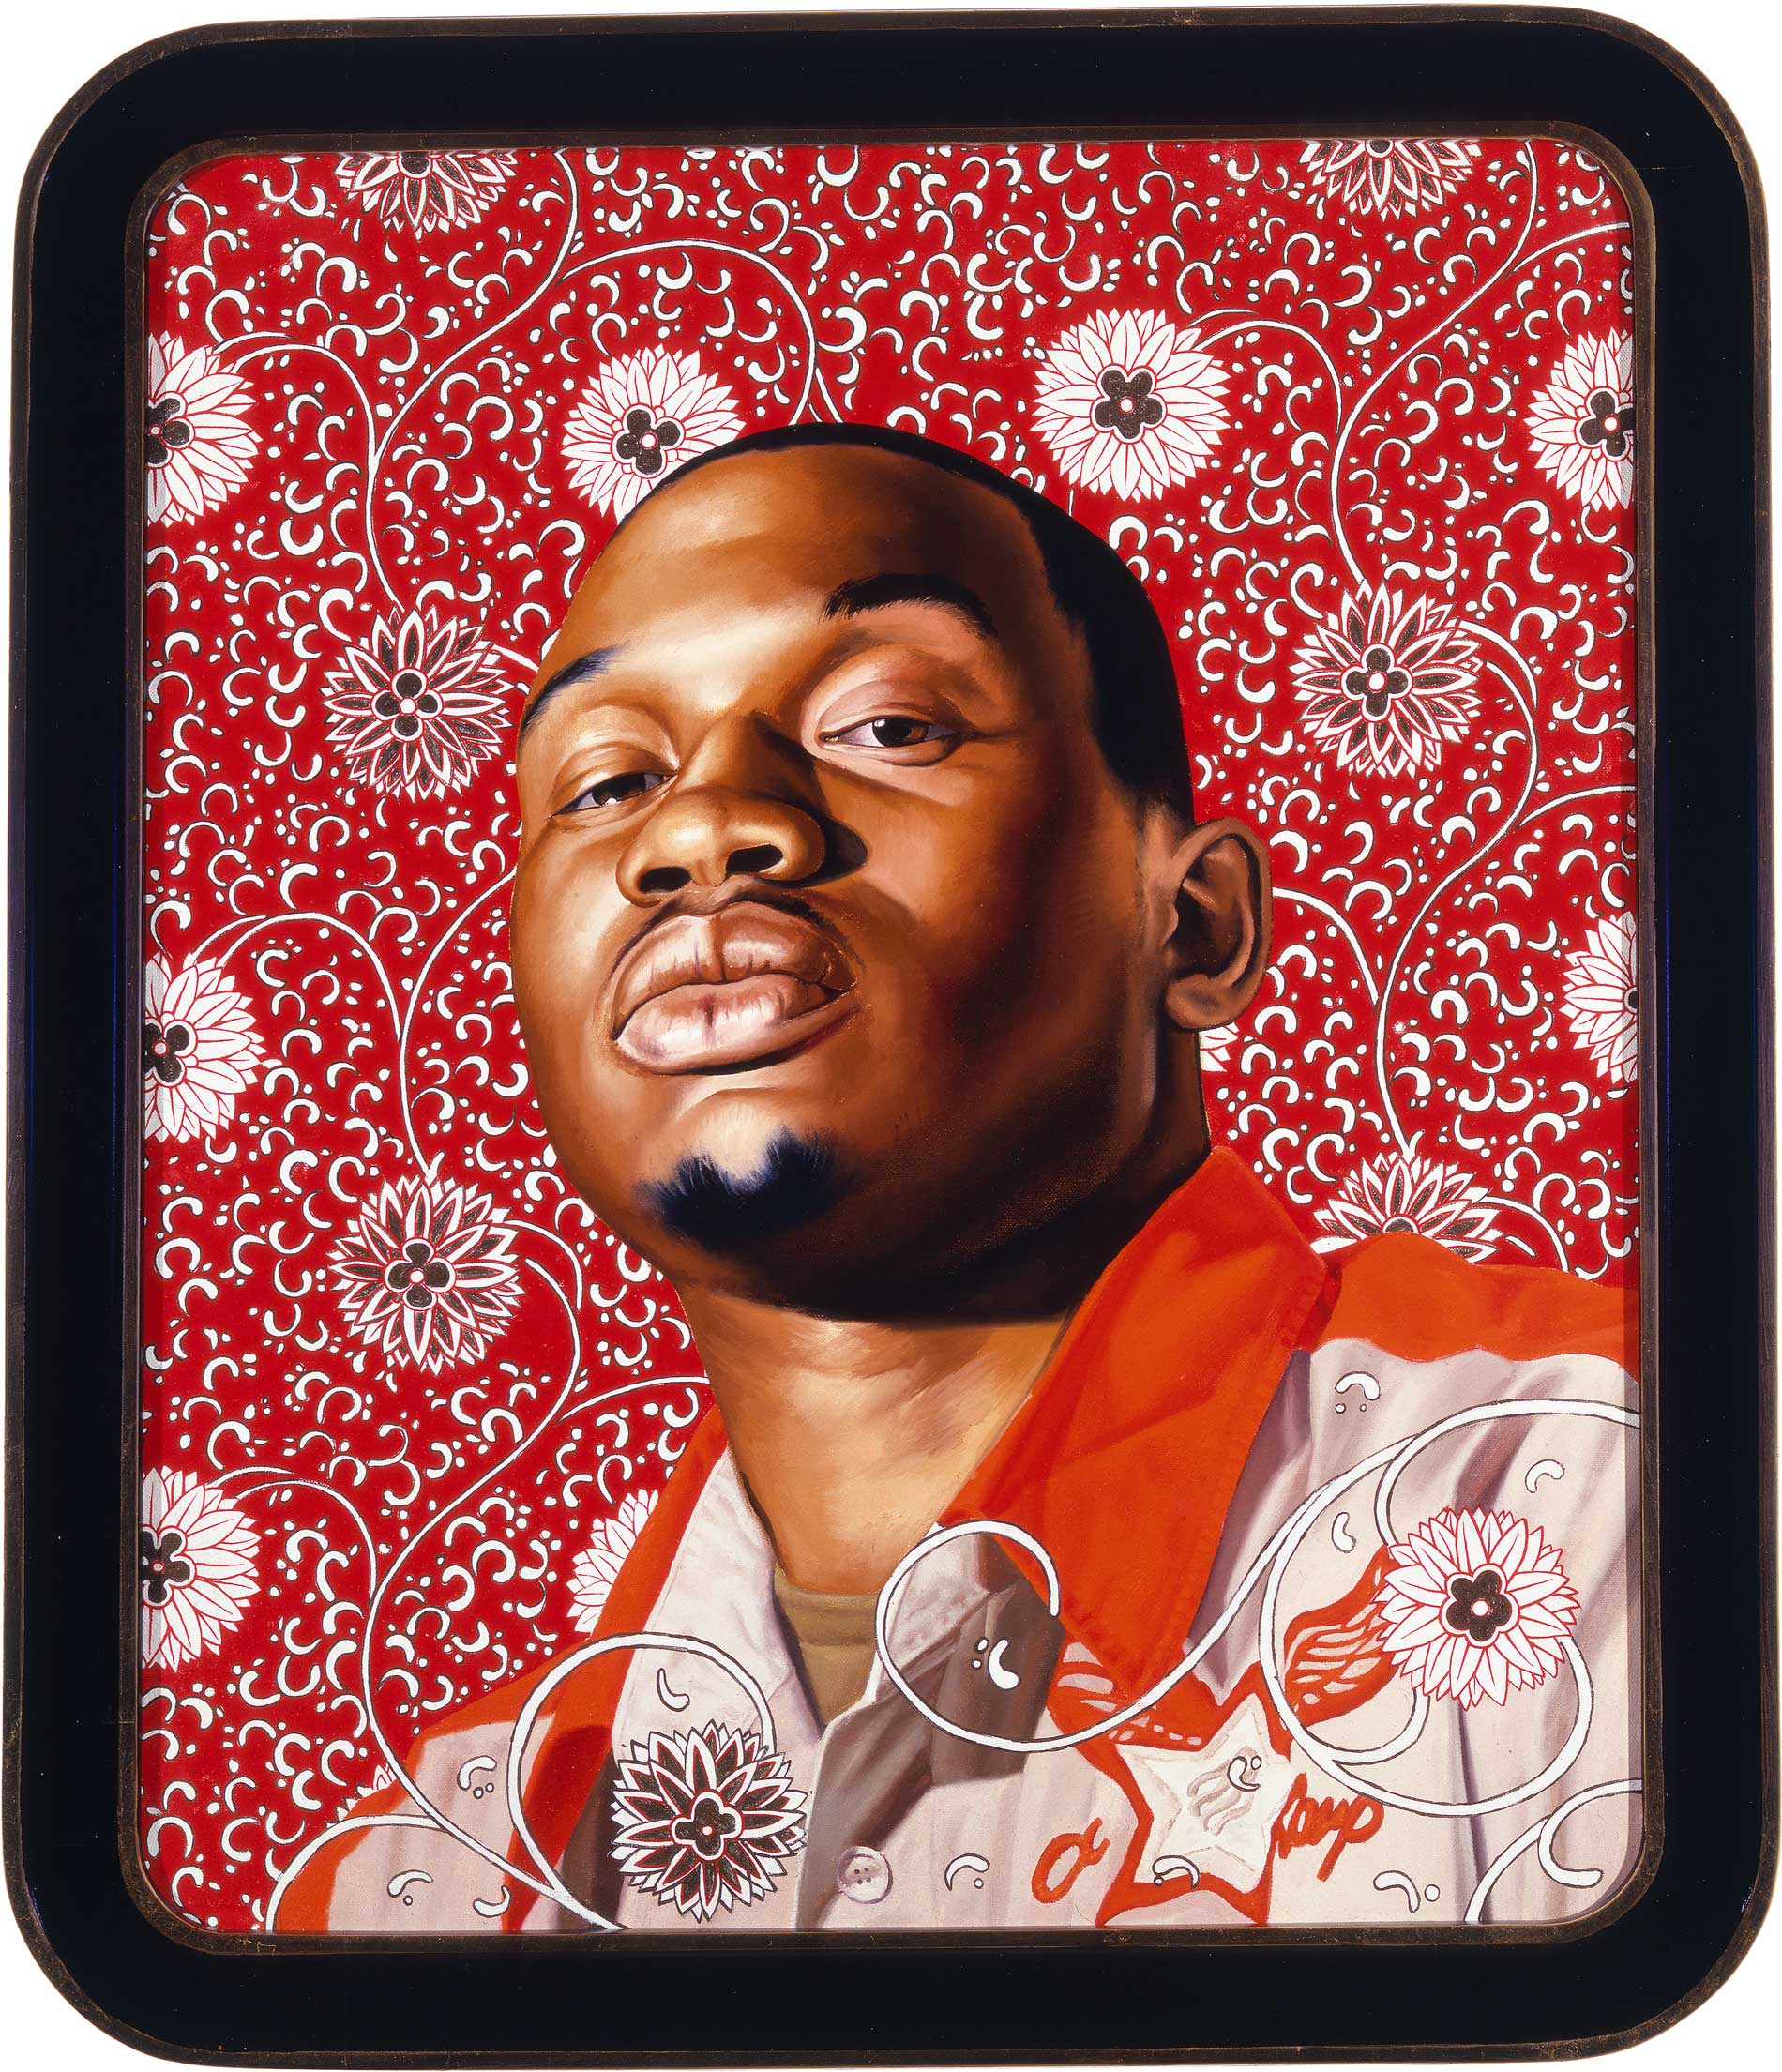 Kehinde Wiley | The World Stage: China | Ivelaw I, 2007 Oil on Canvas.  | 14